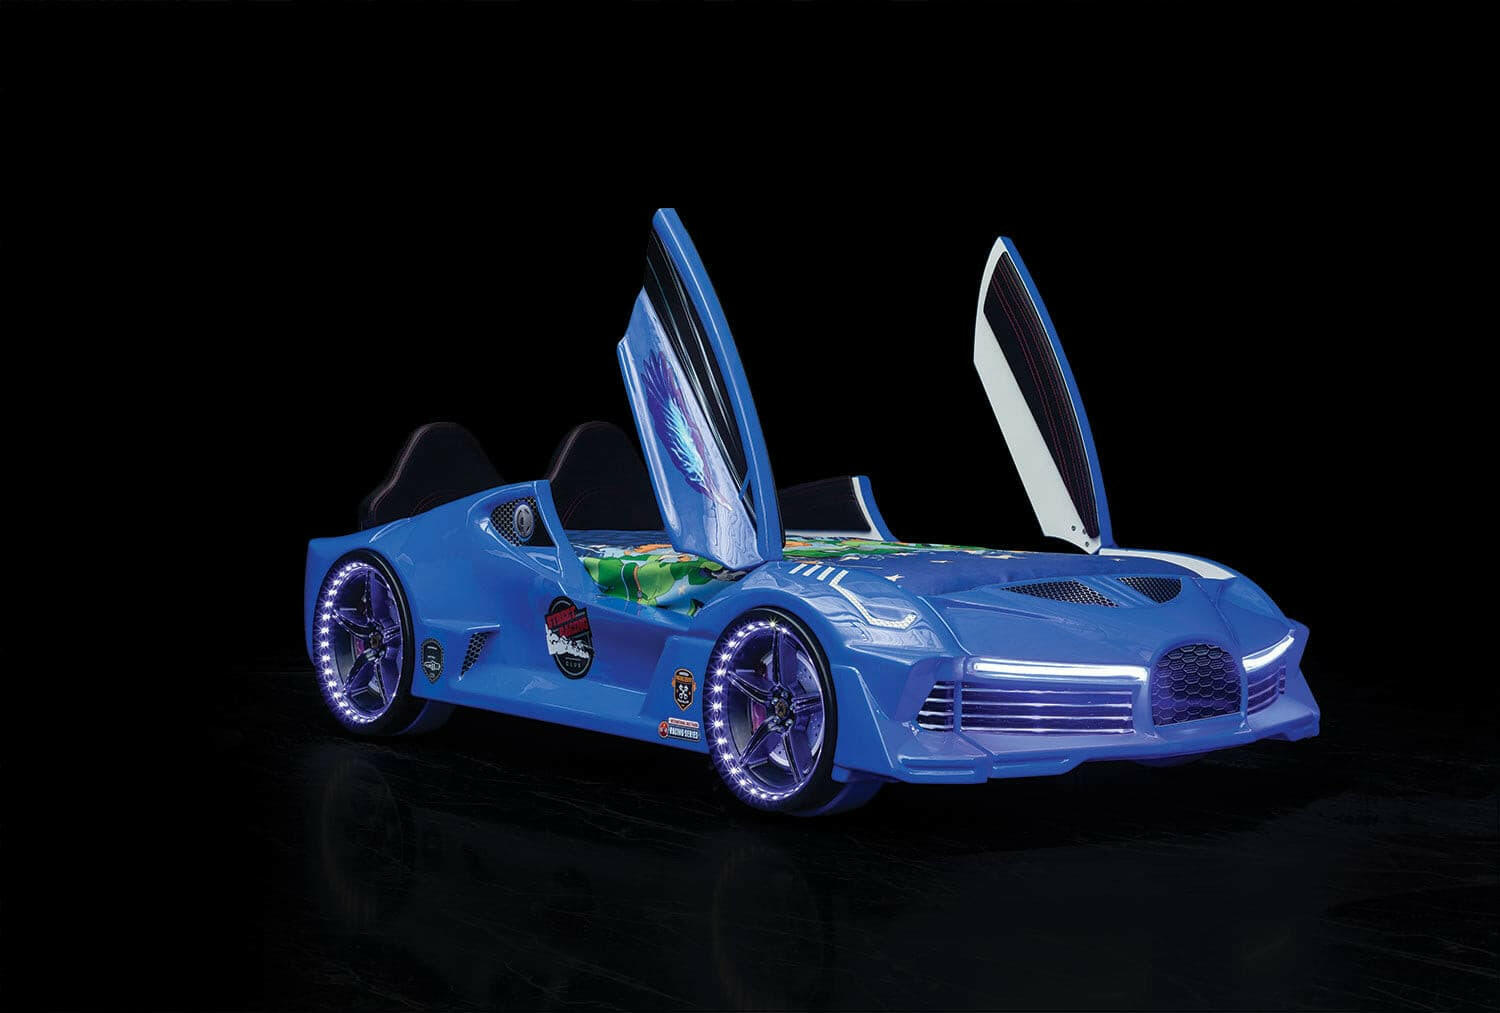 Aero Super Car Kids Bed Lifting Doors Headlights Remote Control Toddler Twin Size Frame - Kids Eye Candy